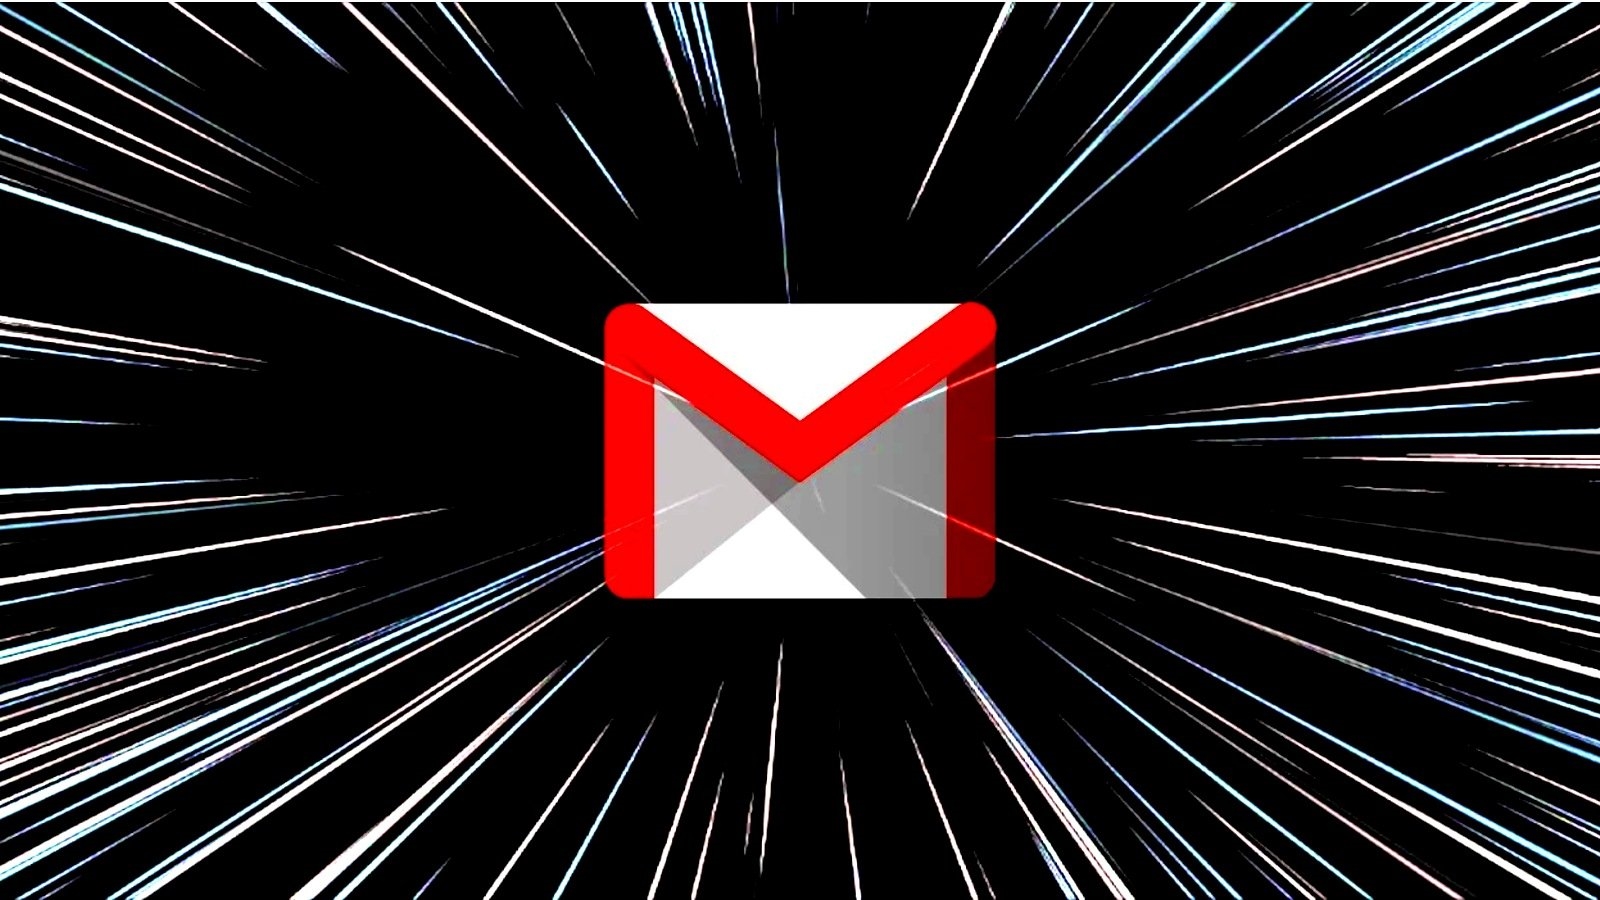 Gmail Users Are Not Receiving Emails Synching With Microsoft Servers: Report